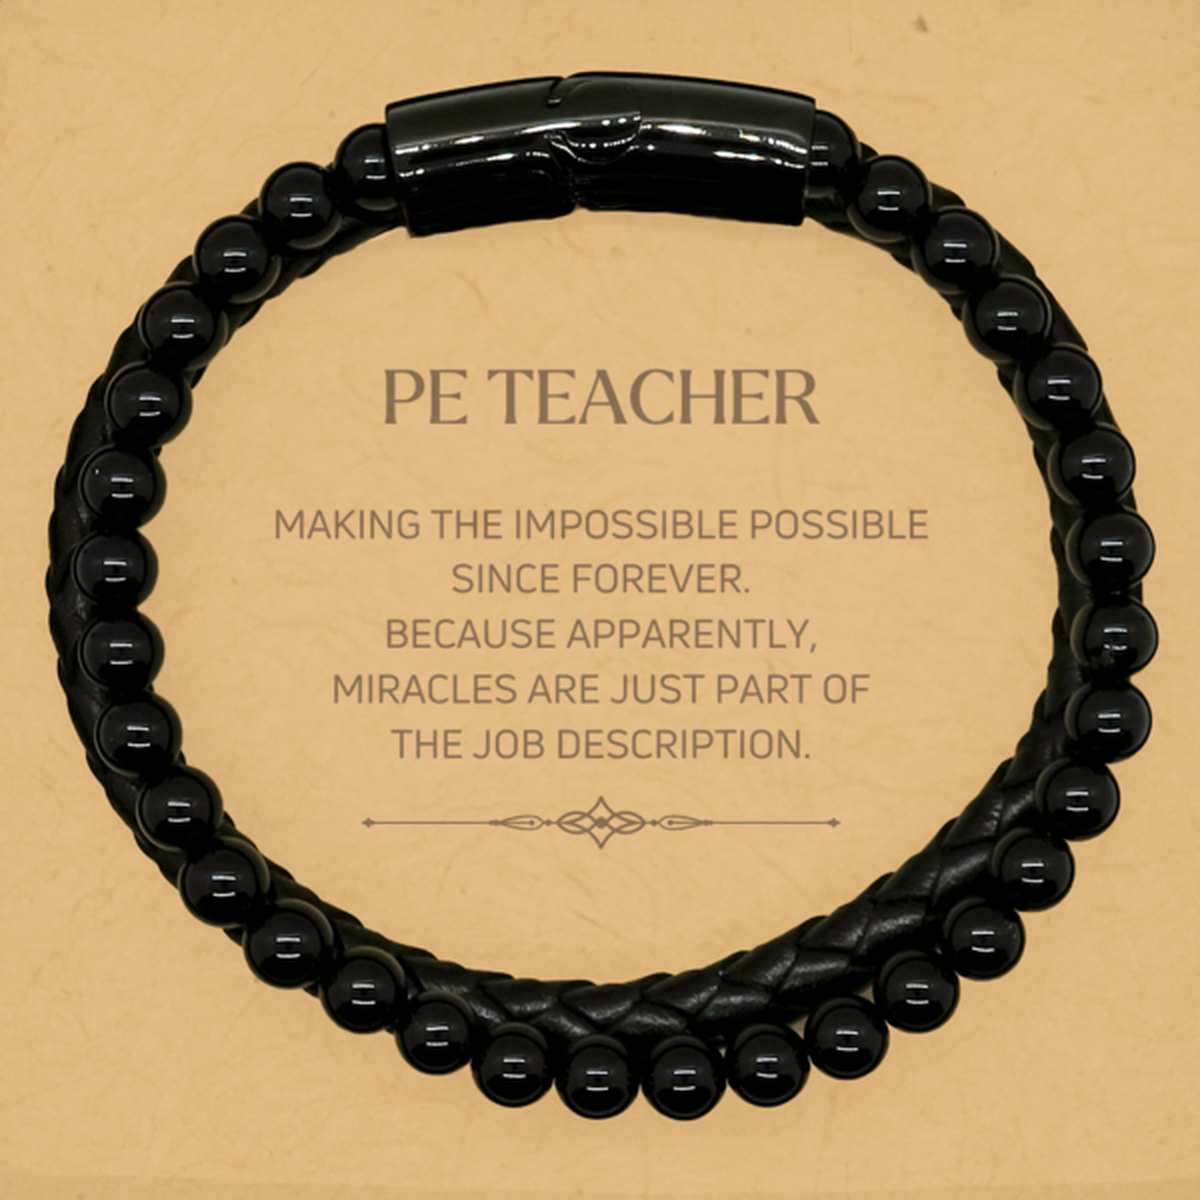 Funny PE Teacher Gifts, Miracles are just part of the job description, Inspirational Birthday Stone Leather Bracelets For PE Teacher, Men, Women, Coworkers, Friends, Boss